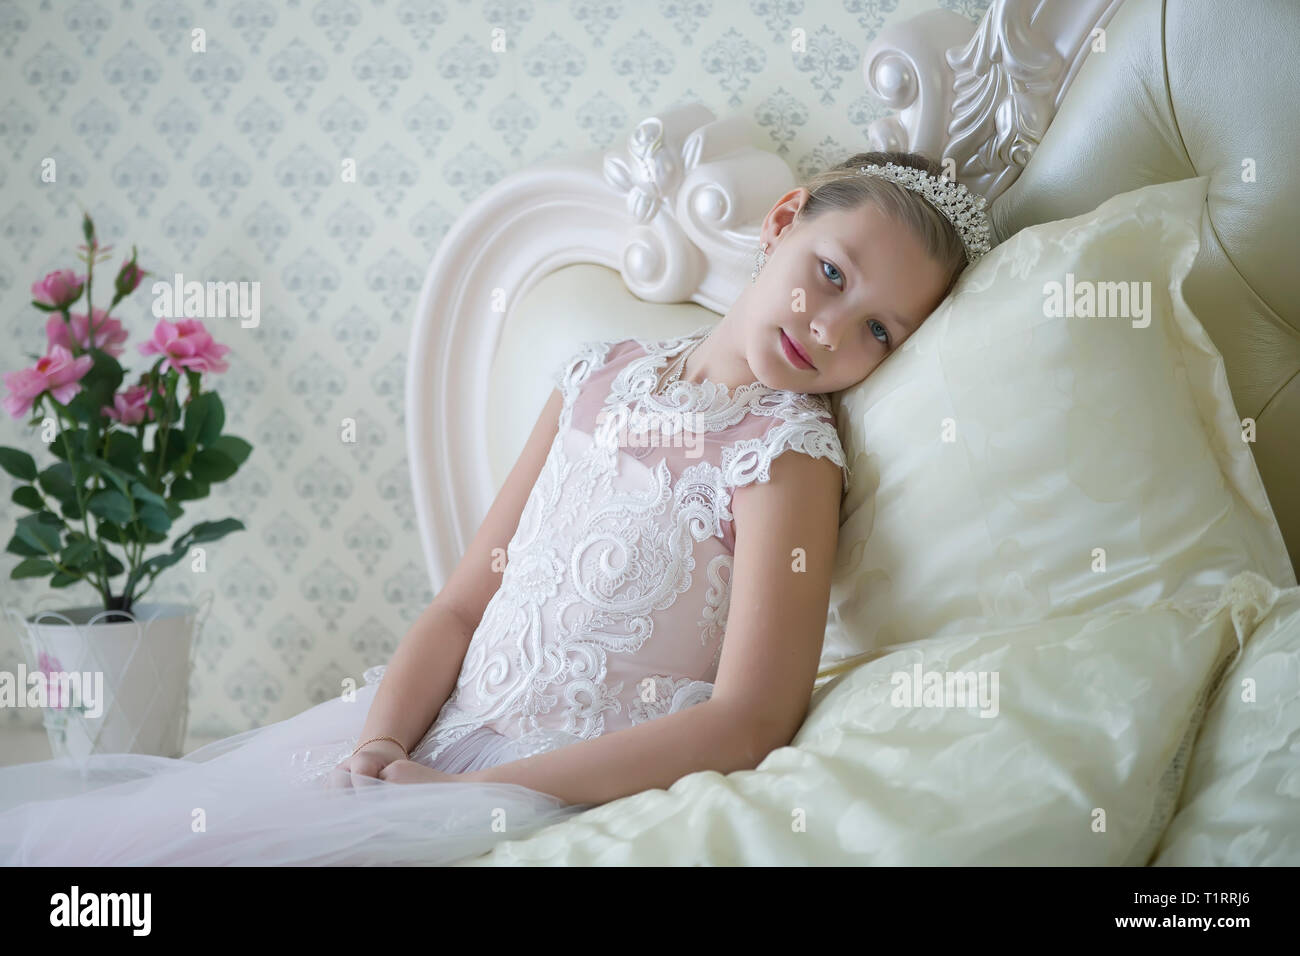 Cute tender girl teenager lies on the bed. Princess in a white dress with a crown. Stock Photo